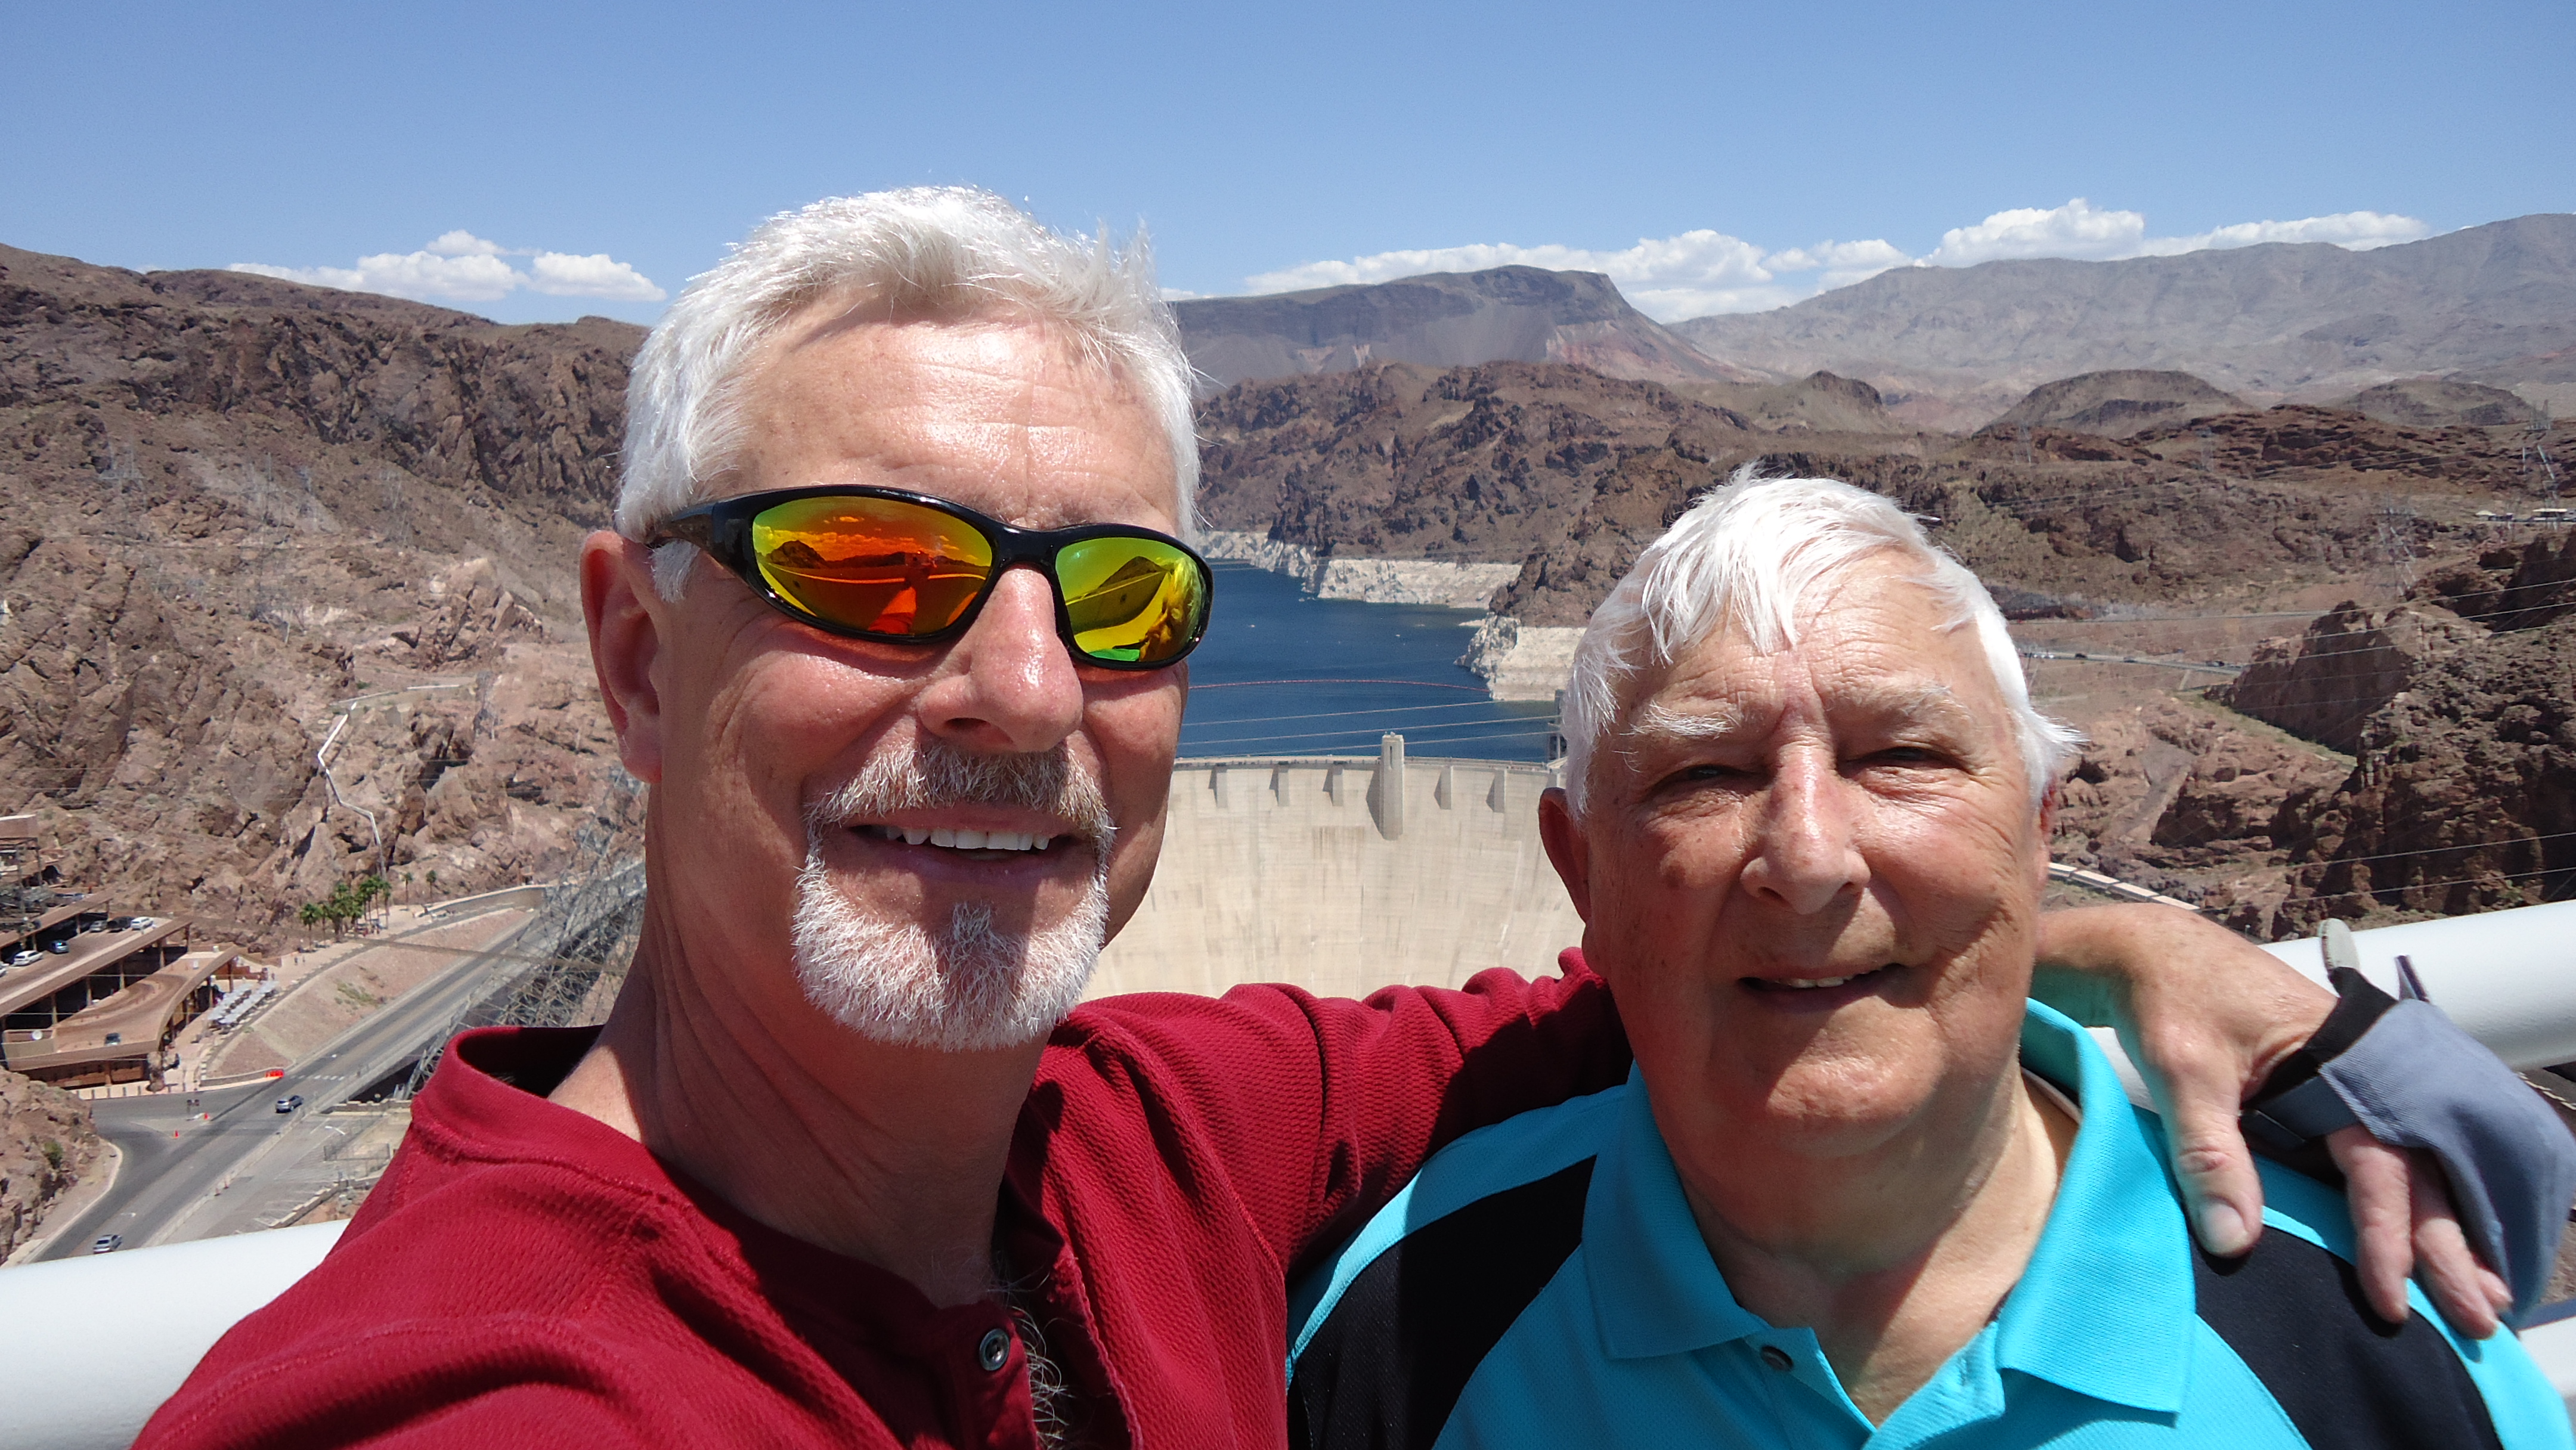 Vance and Pappy at the Hoover Dam